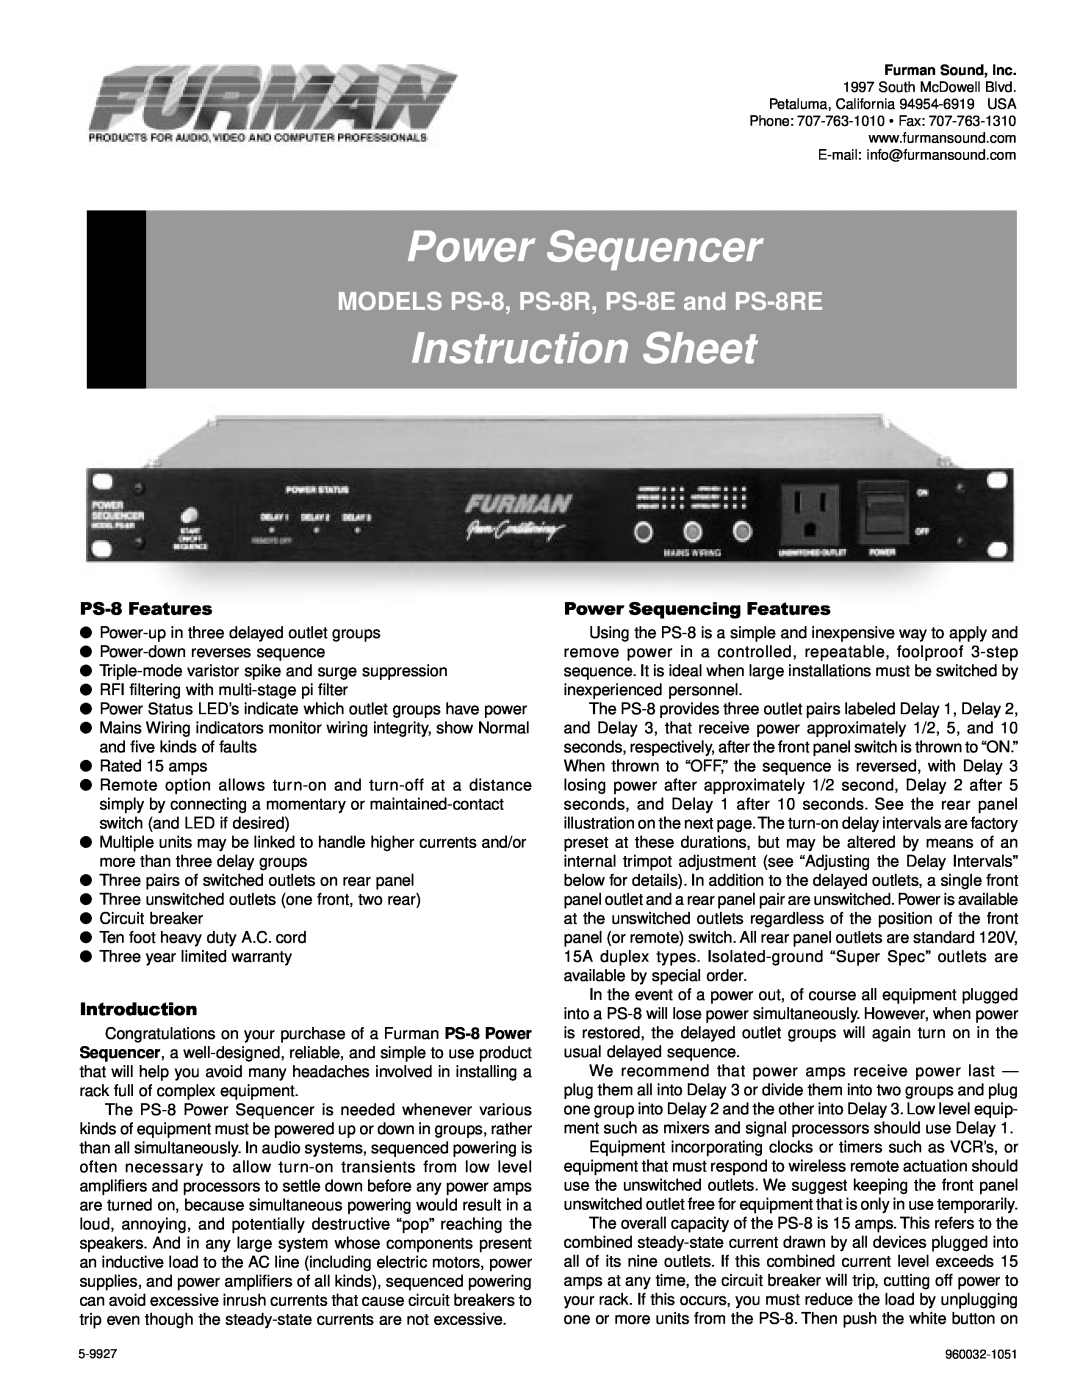 Furman Sound PS-8E, PS-8RE instruction sheet PS-8 Features, Introduction, Power Sequencing Features, Power Sequencer 